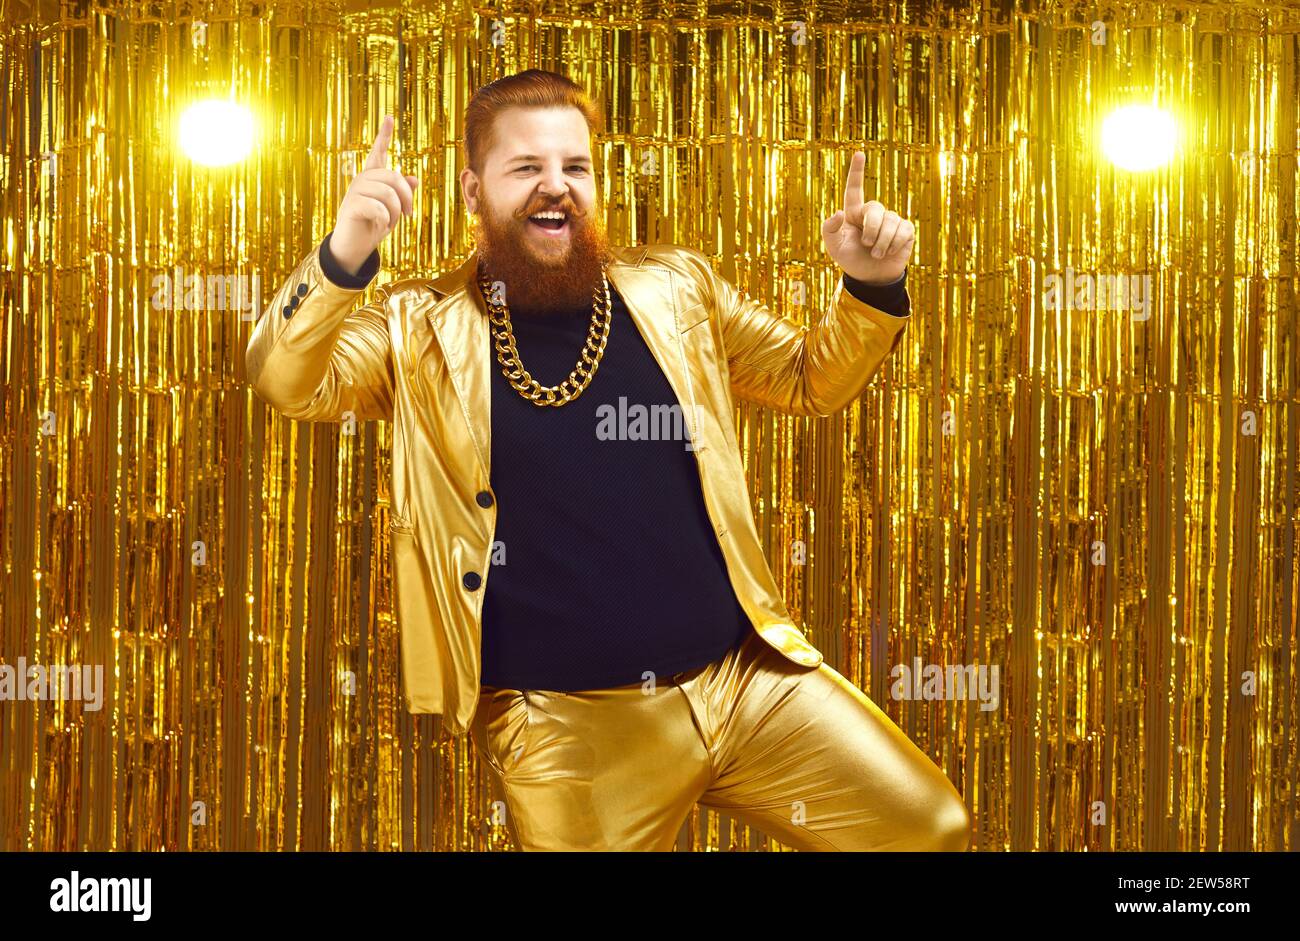 Rich chubby man in a golden suit dances at a party or disco on a bright shiny background. Stock Photo